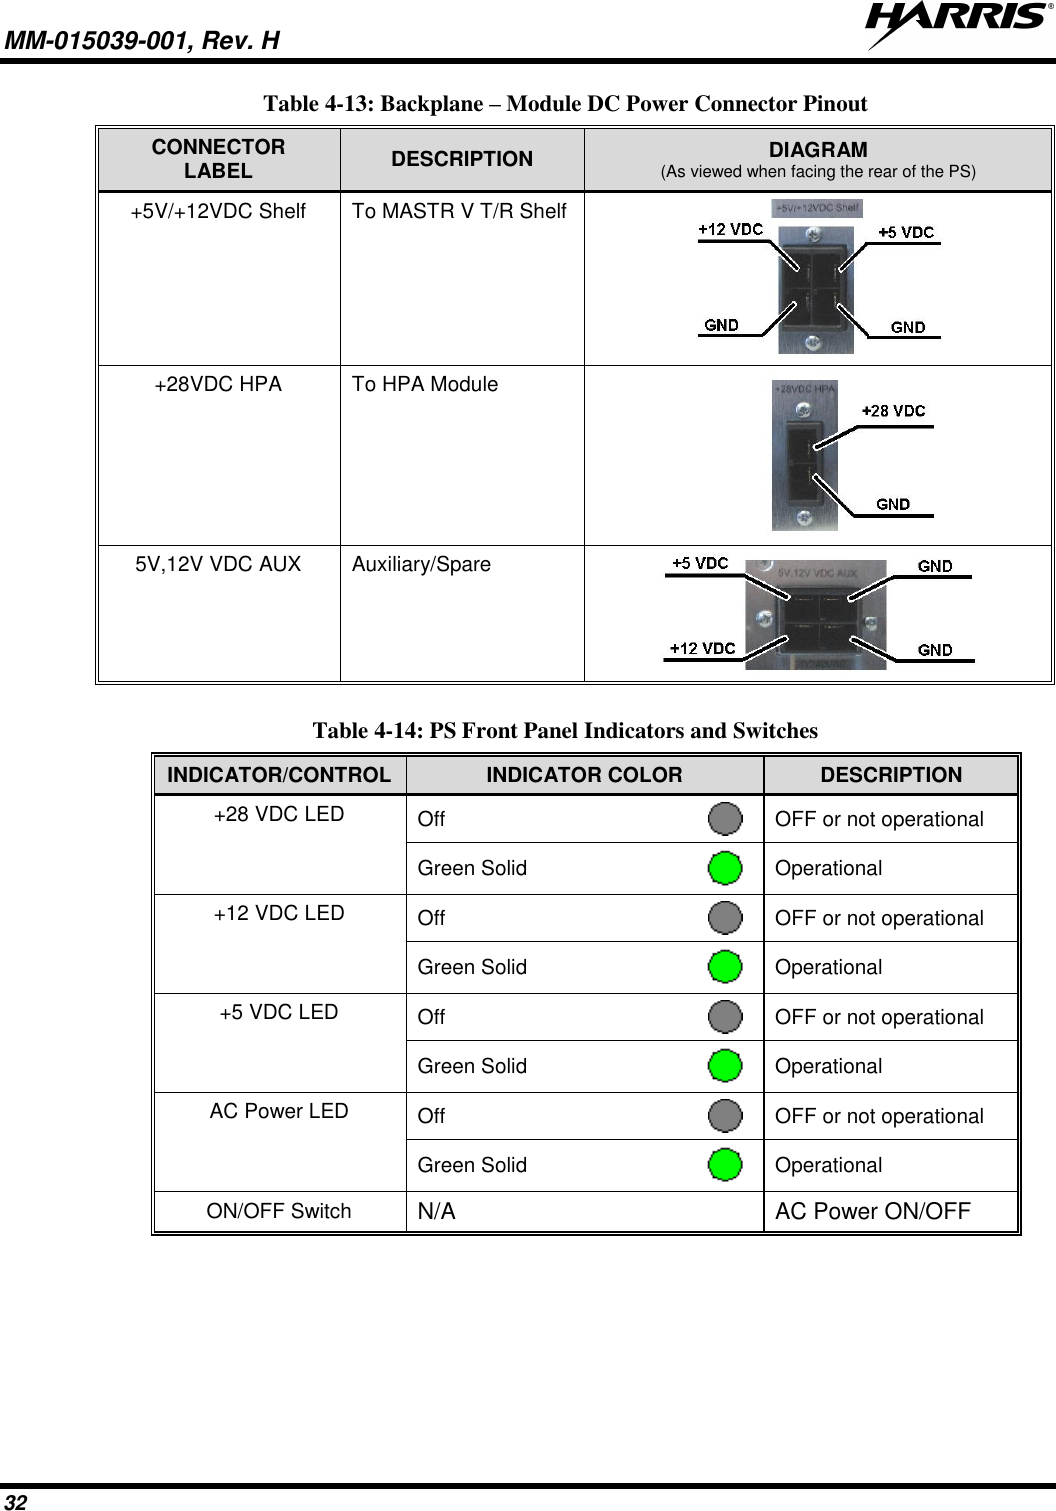 MM-015039-001, Rev. H     32 Table 4-13: Backplane – Module DC Power Connector Pinout CONNECTOR LABEL DESCRIPTION DIAGRAM (As viewed when facing the rear of the PS) +5V/+12VDC Shelf To MASTR V T/R Shelf  +28VDC HPA To HPA Module                                5V,12V VDC AUX Auxiliary/Spare   Table 4-14: PS Front Panel Indicators and Switches INDICATOR/CONTROL INDICATOR COLOR DESCRIPTION +28 VDC LED Off  OFF or not operational Green Solid  Operational +12 VDC LED Off  OFF or not operational Green Solid  Operational +5 VDC LED Off  OFF or not operational Green Solid  Operational AC Power LED Off  OFF or not operational Green Solid  Operational ON/OFF Switch N/A  AC Power ON/OFF 